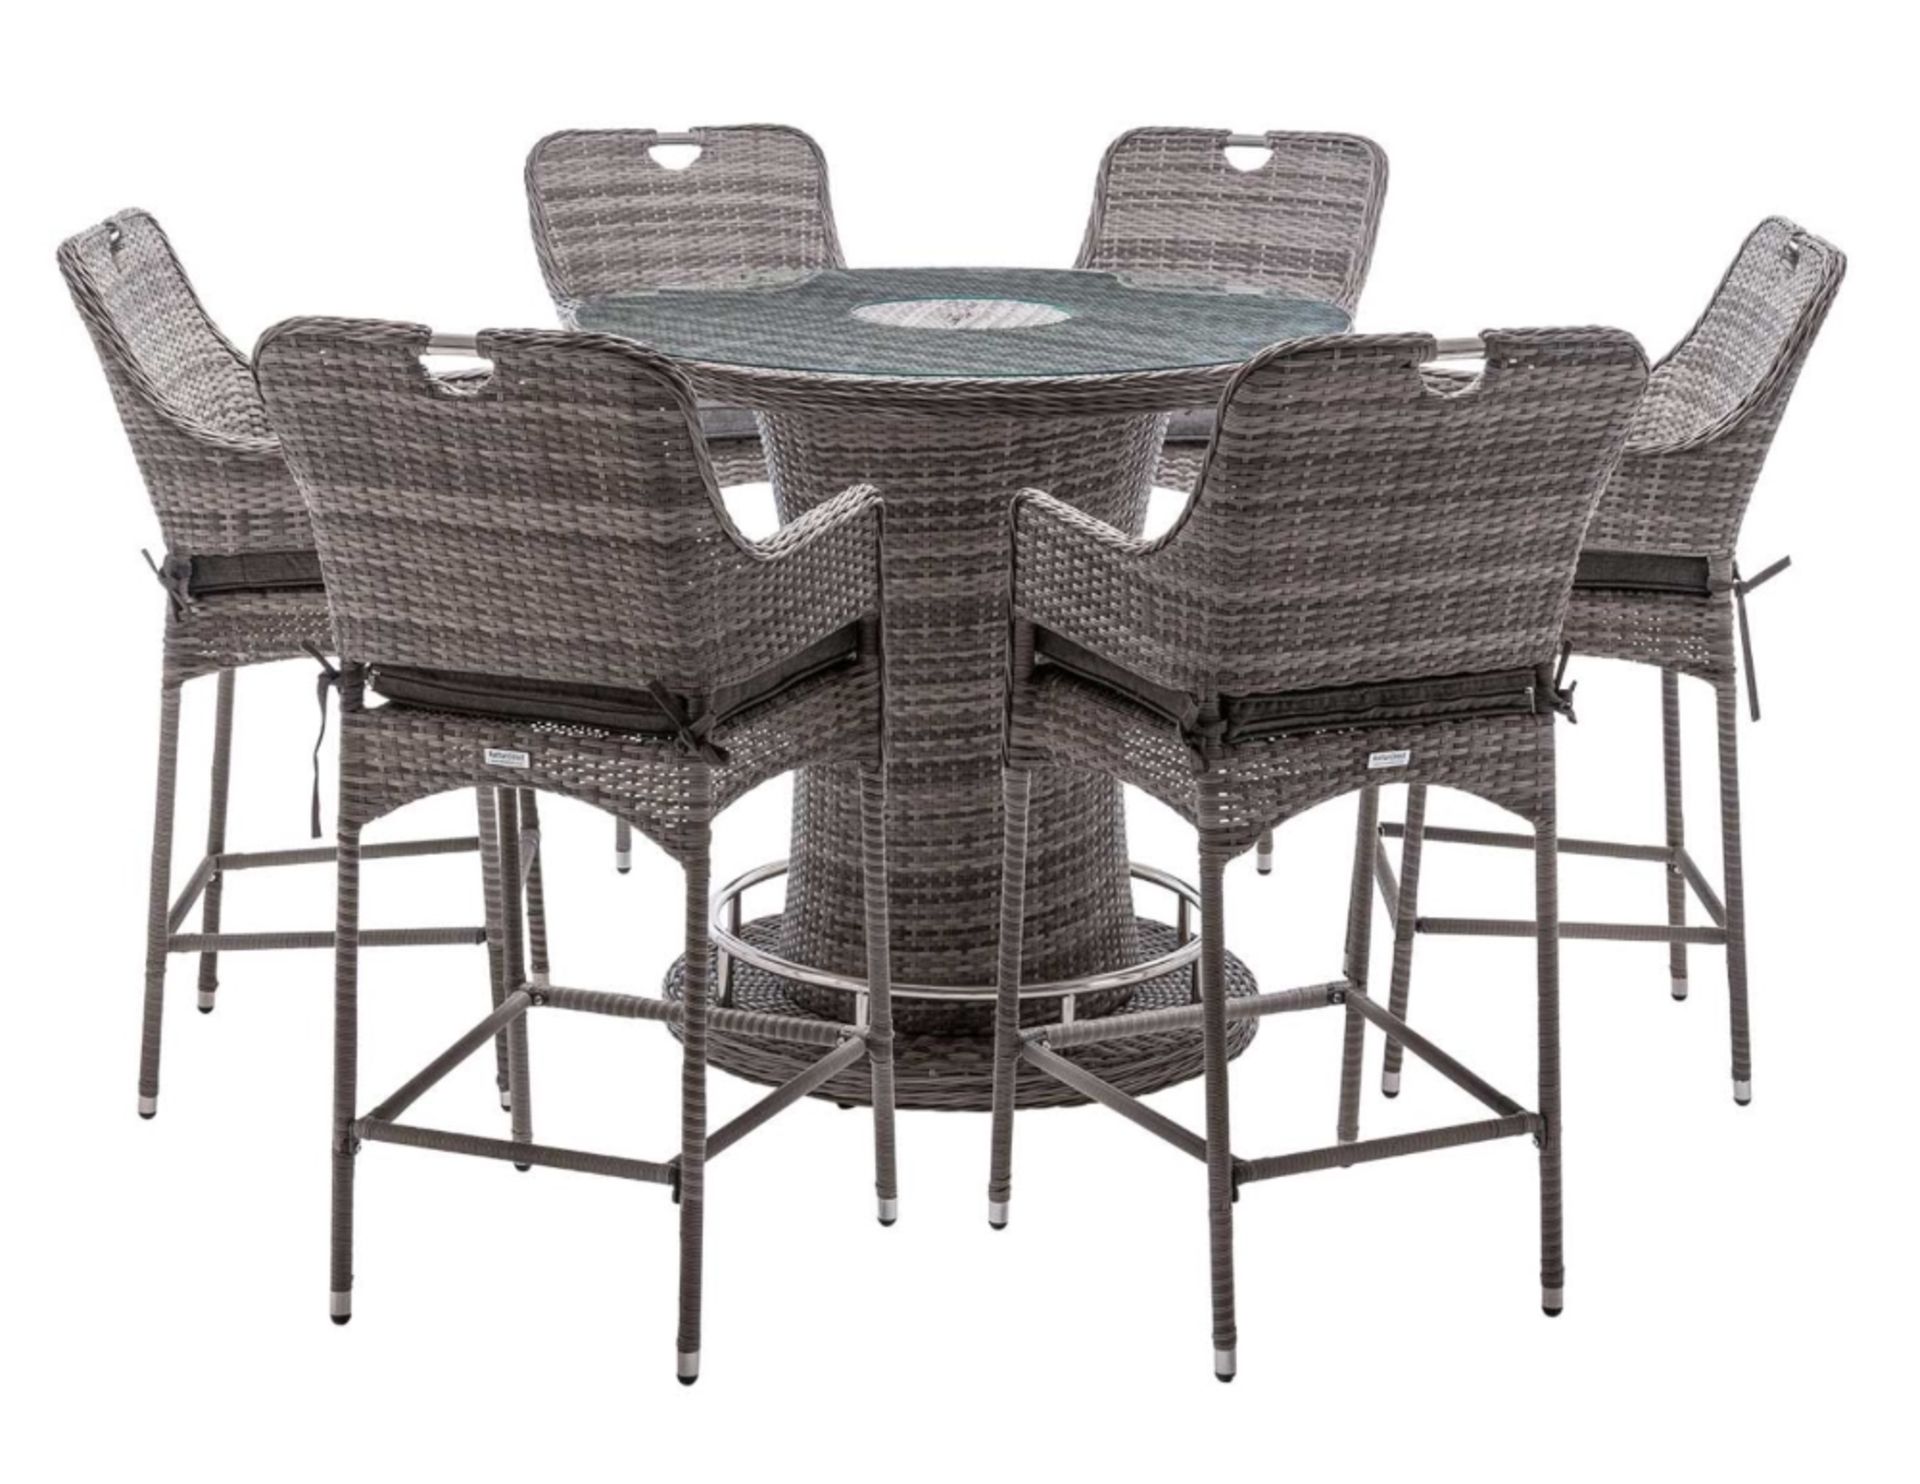 Brand New Rattan Garden Bar Set with 6 Stools in Grey . RRP £2,599